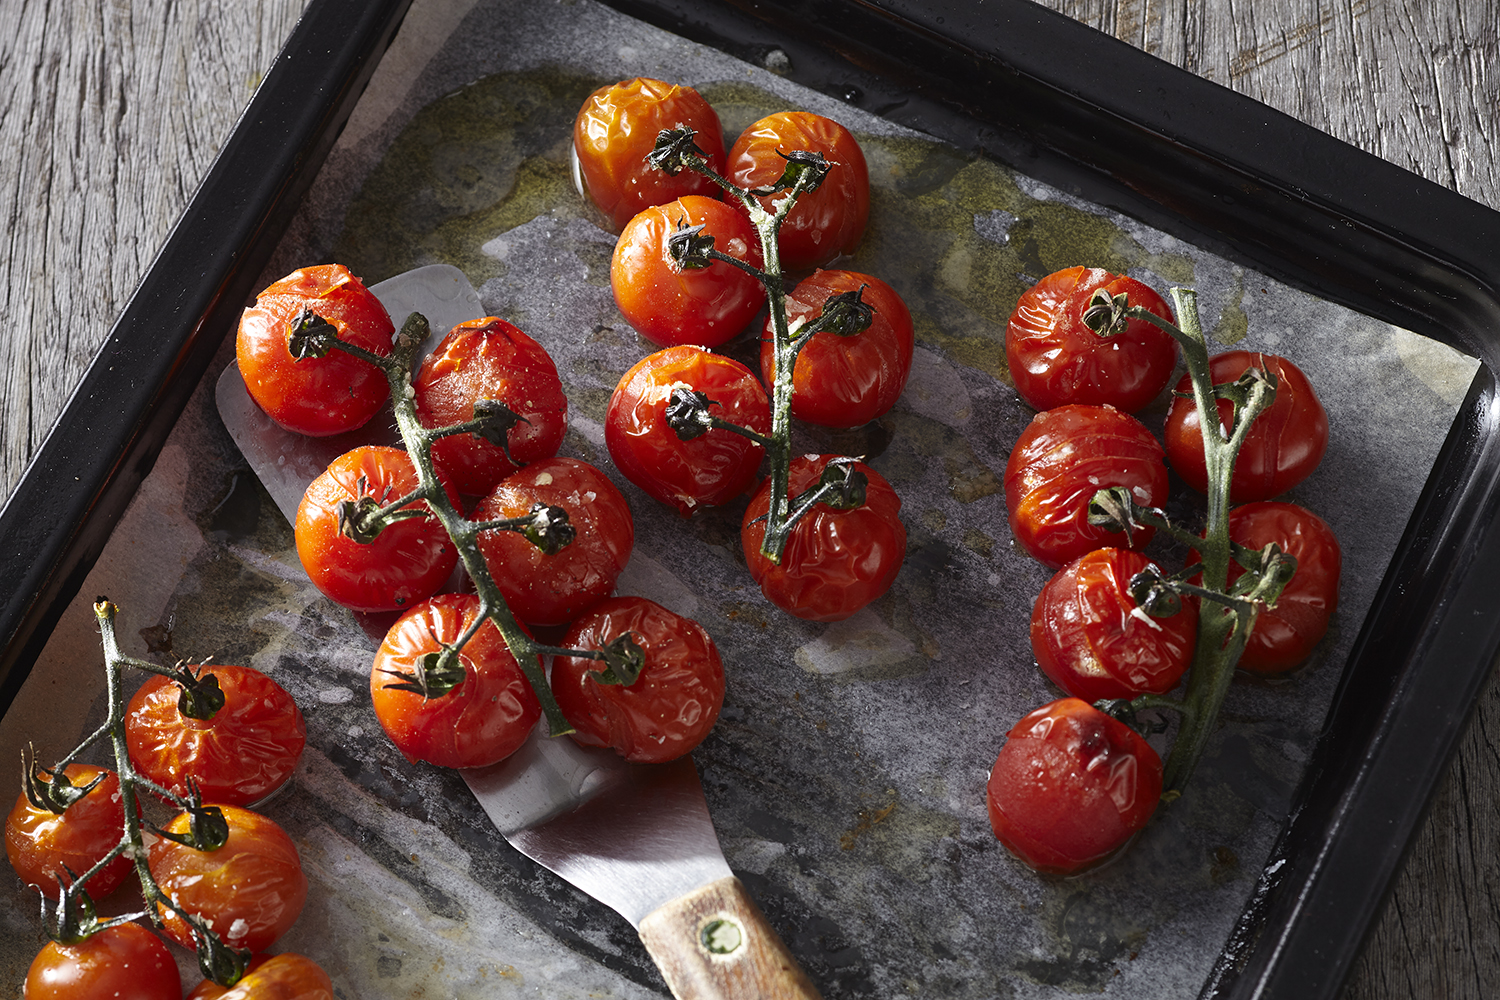 Grilling vine tomatoes-Prominent tomatoes